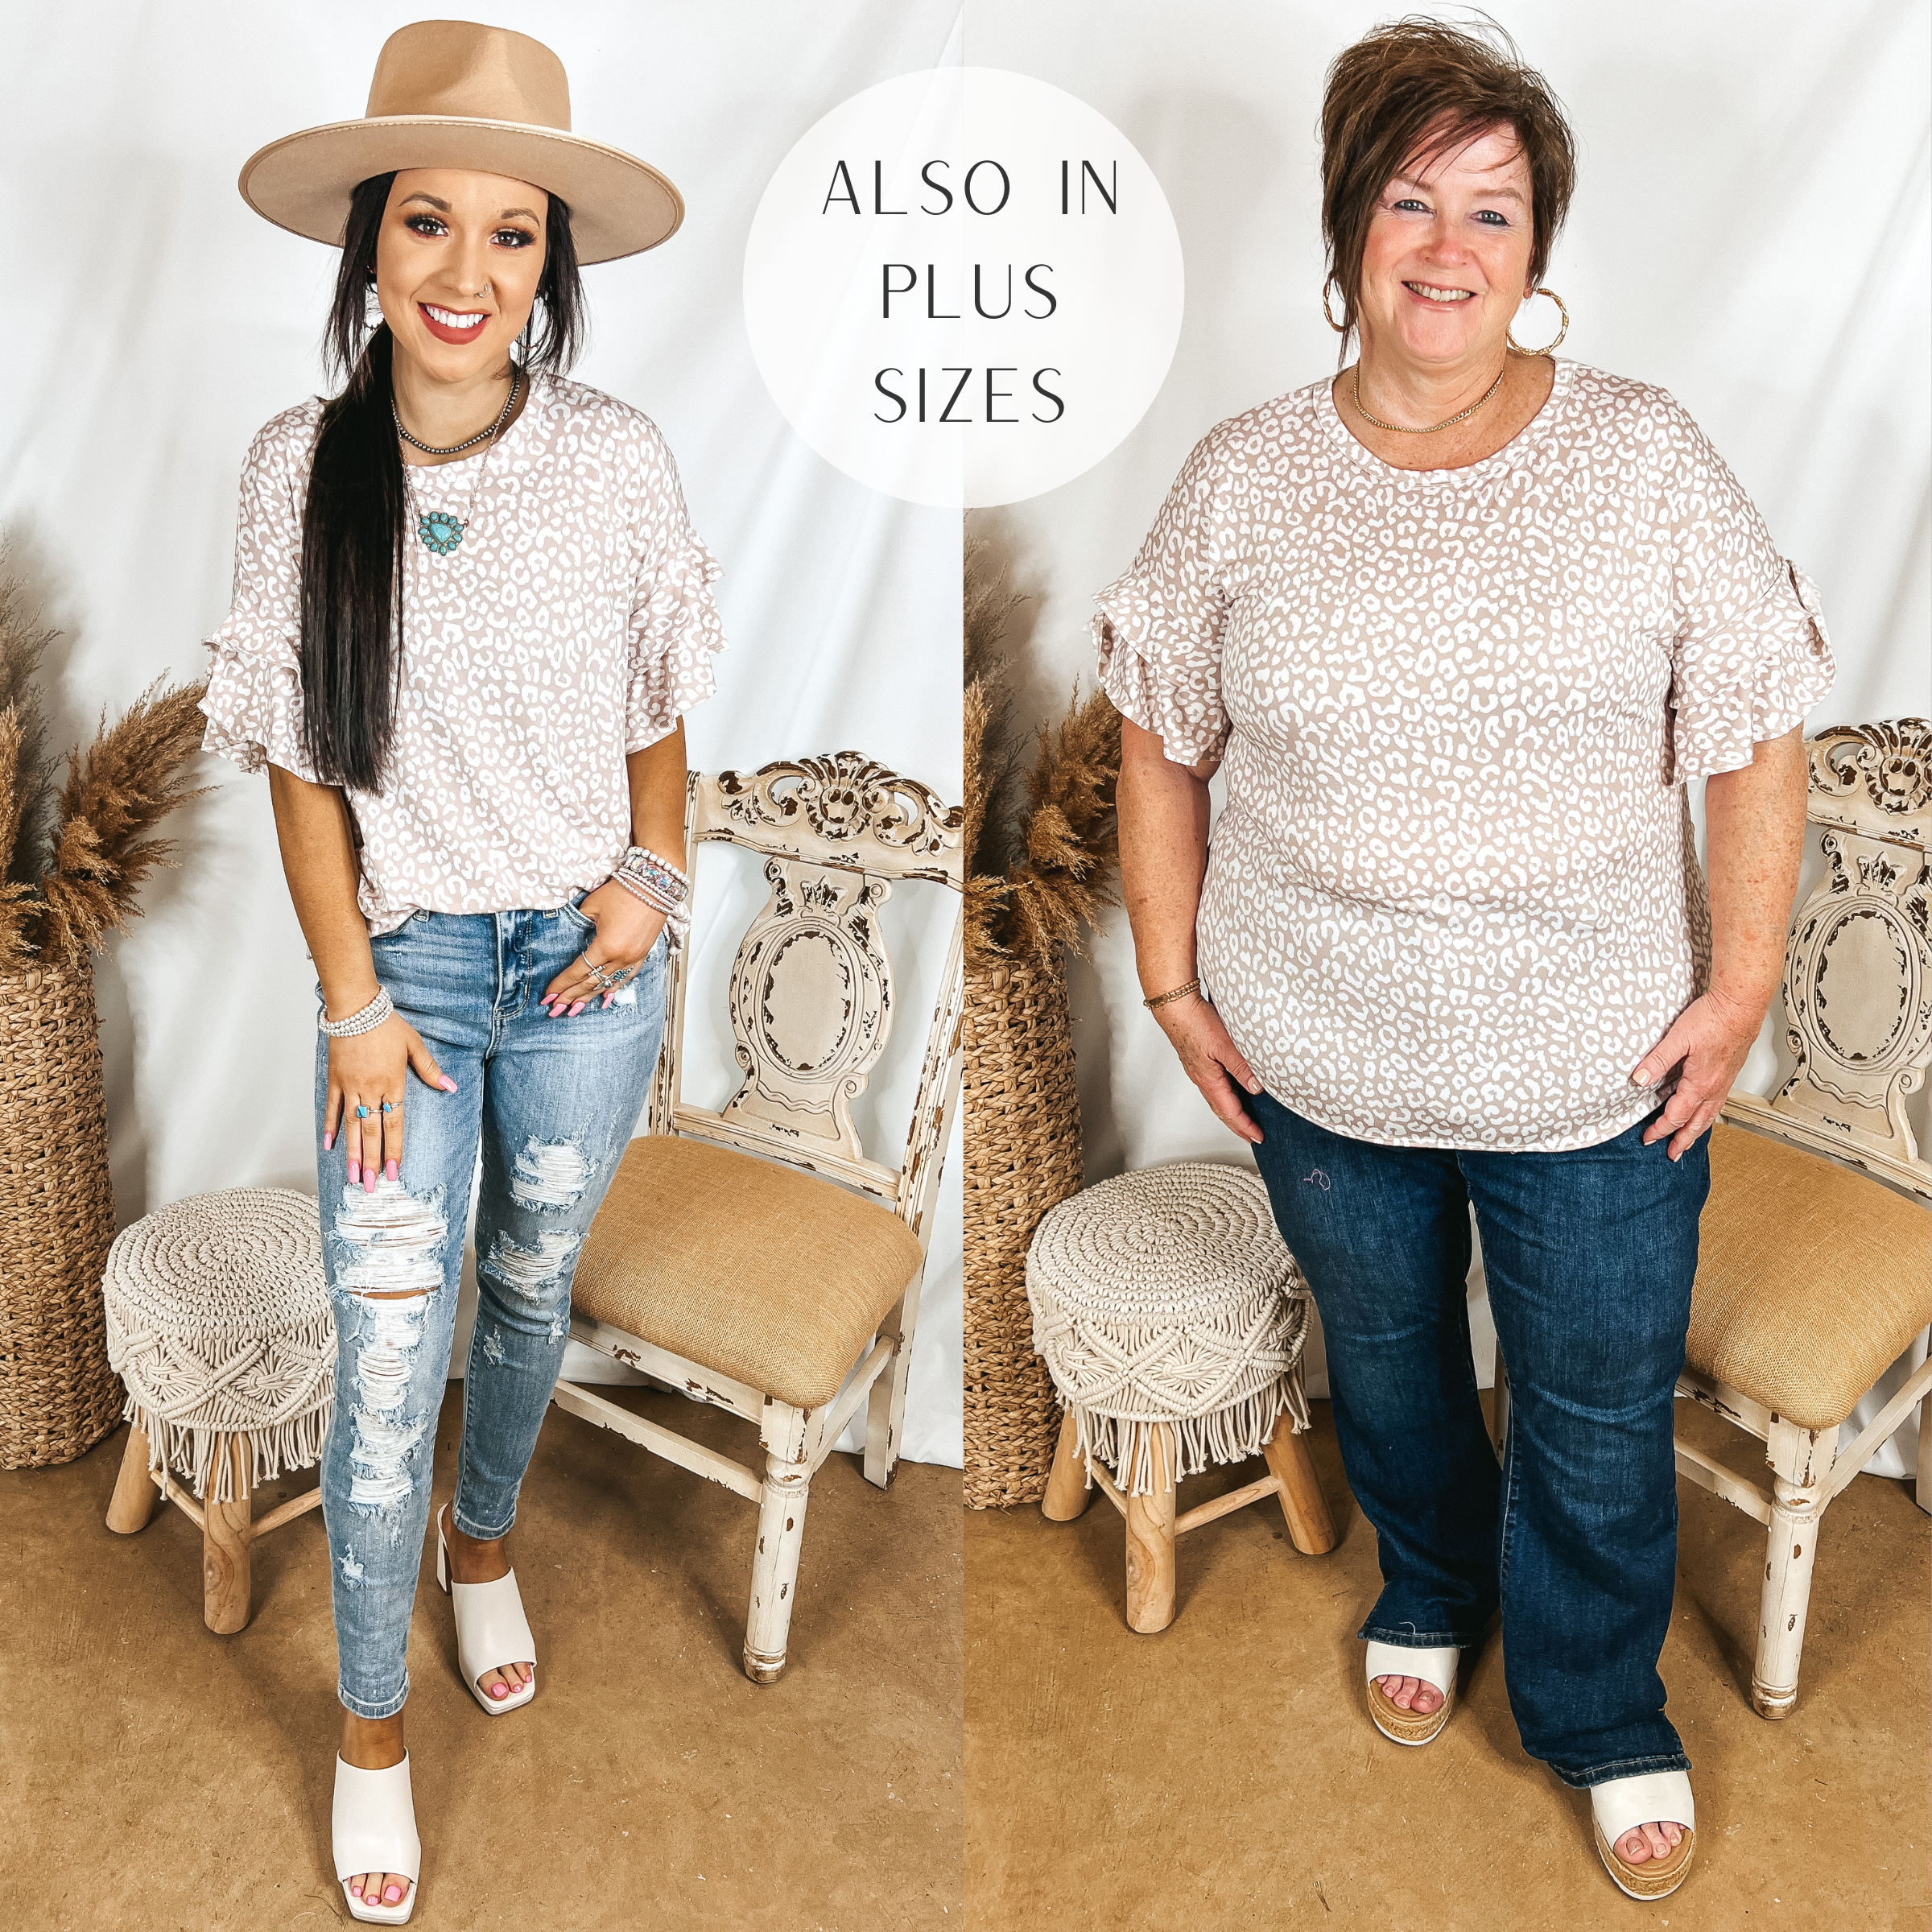 Models are wearing a beige leopard print top with ruffle short sleeves. Size small model has it paired with a tan hat, light wash skinny jeans, and white heels. Plus suze model has it paired with dark wash bootcut jeans, white sandals, and gold jewelry.